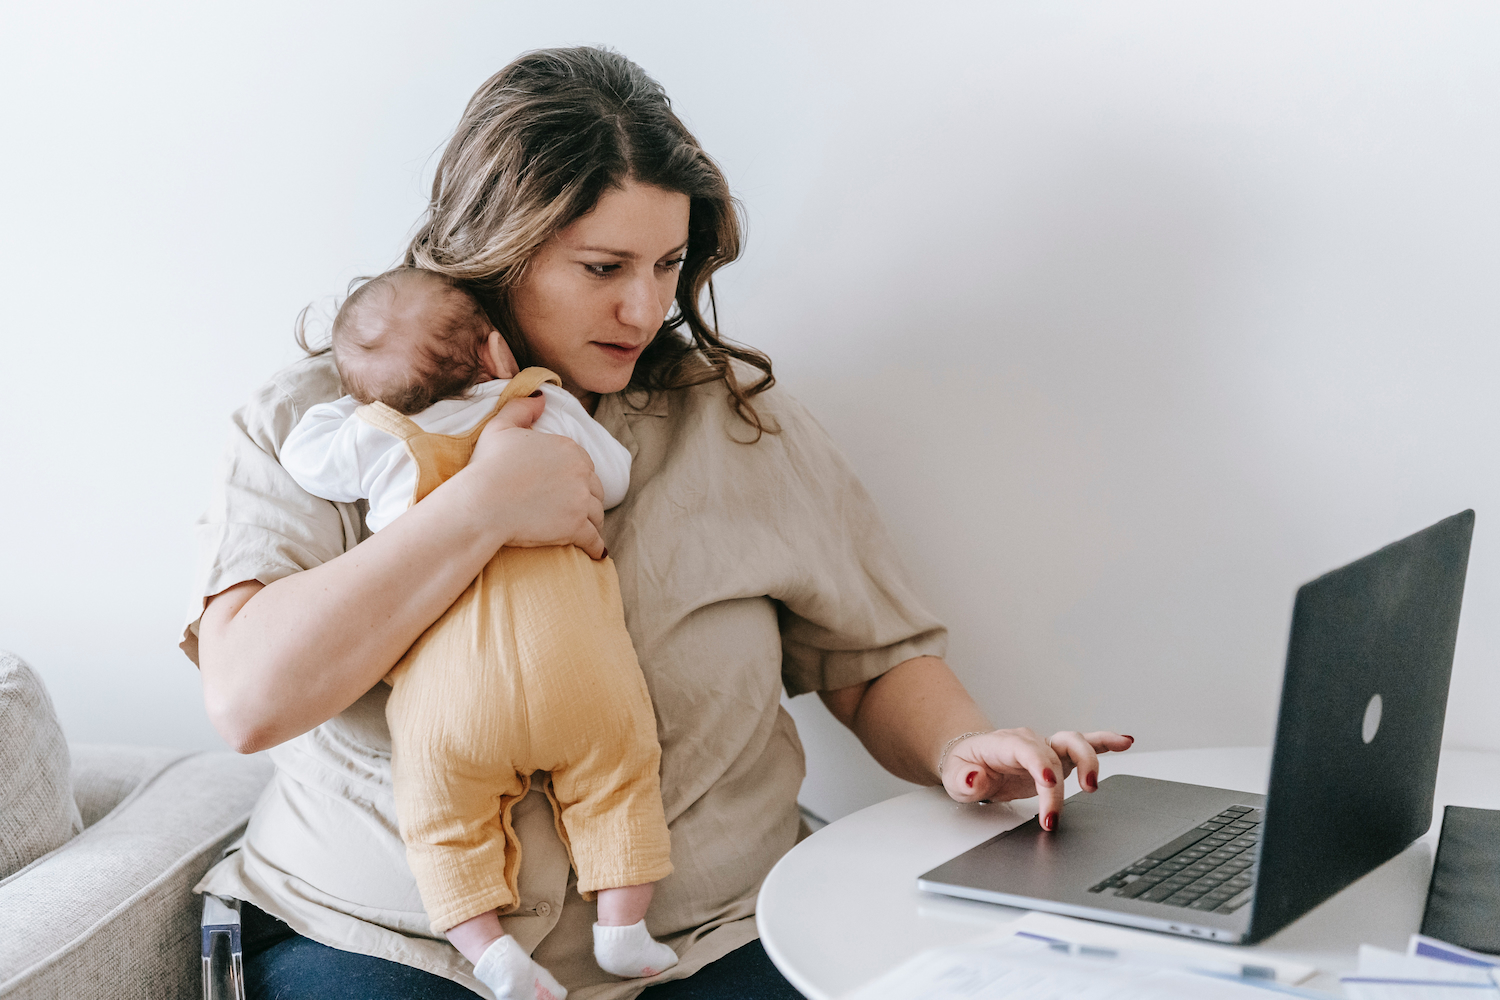  A working mom juggles baby care with work